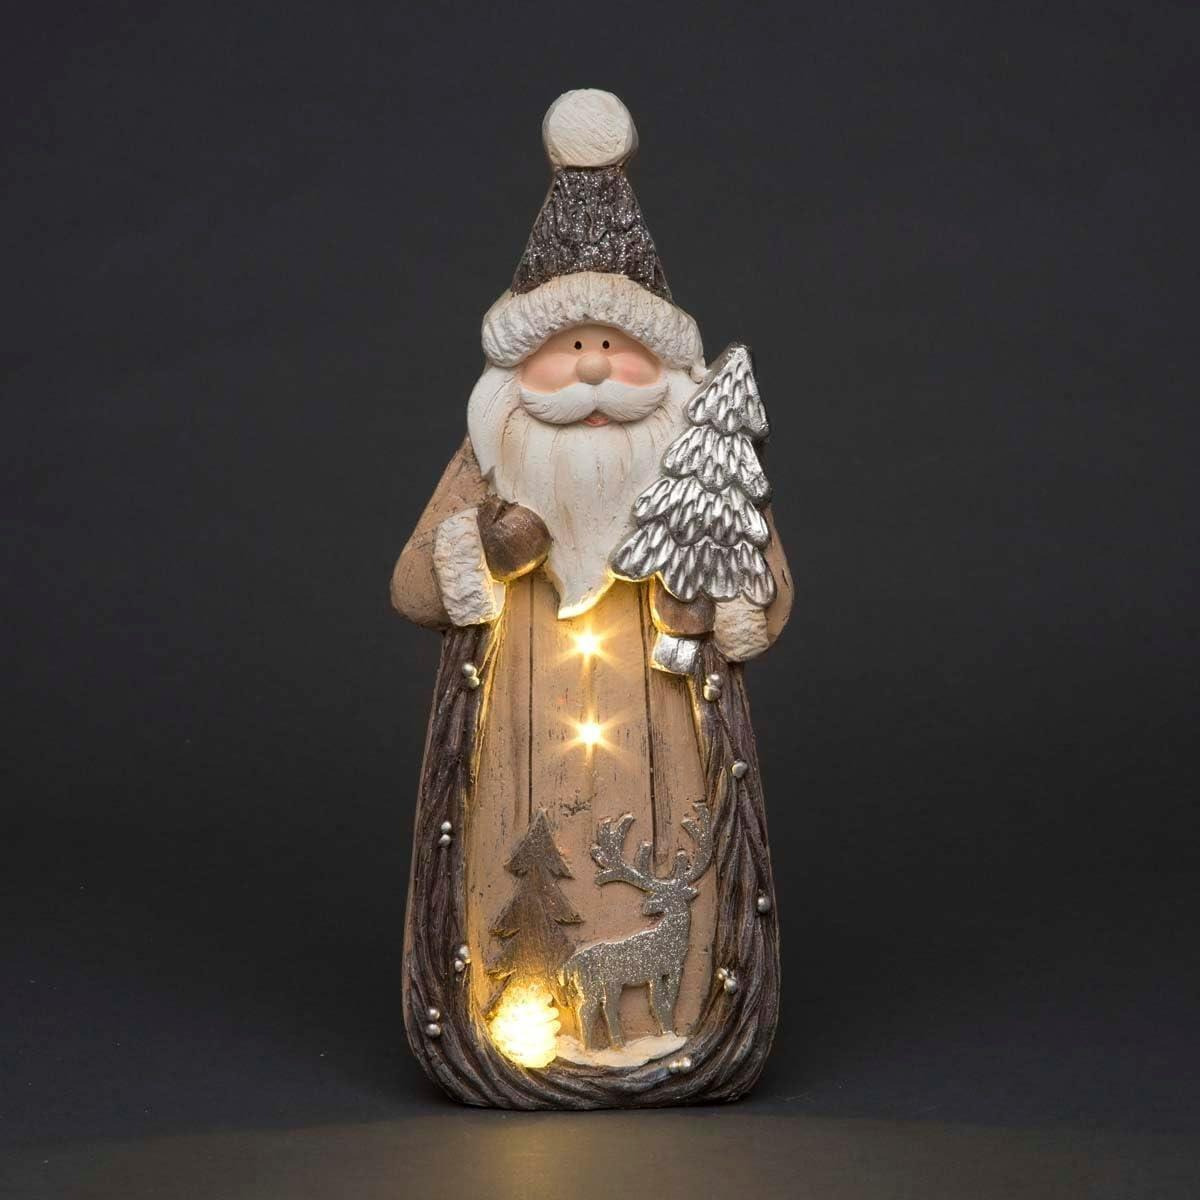 46cm Santa Forest Figurine Christmas Resin Battery Operated LEDs Decoration - image 1